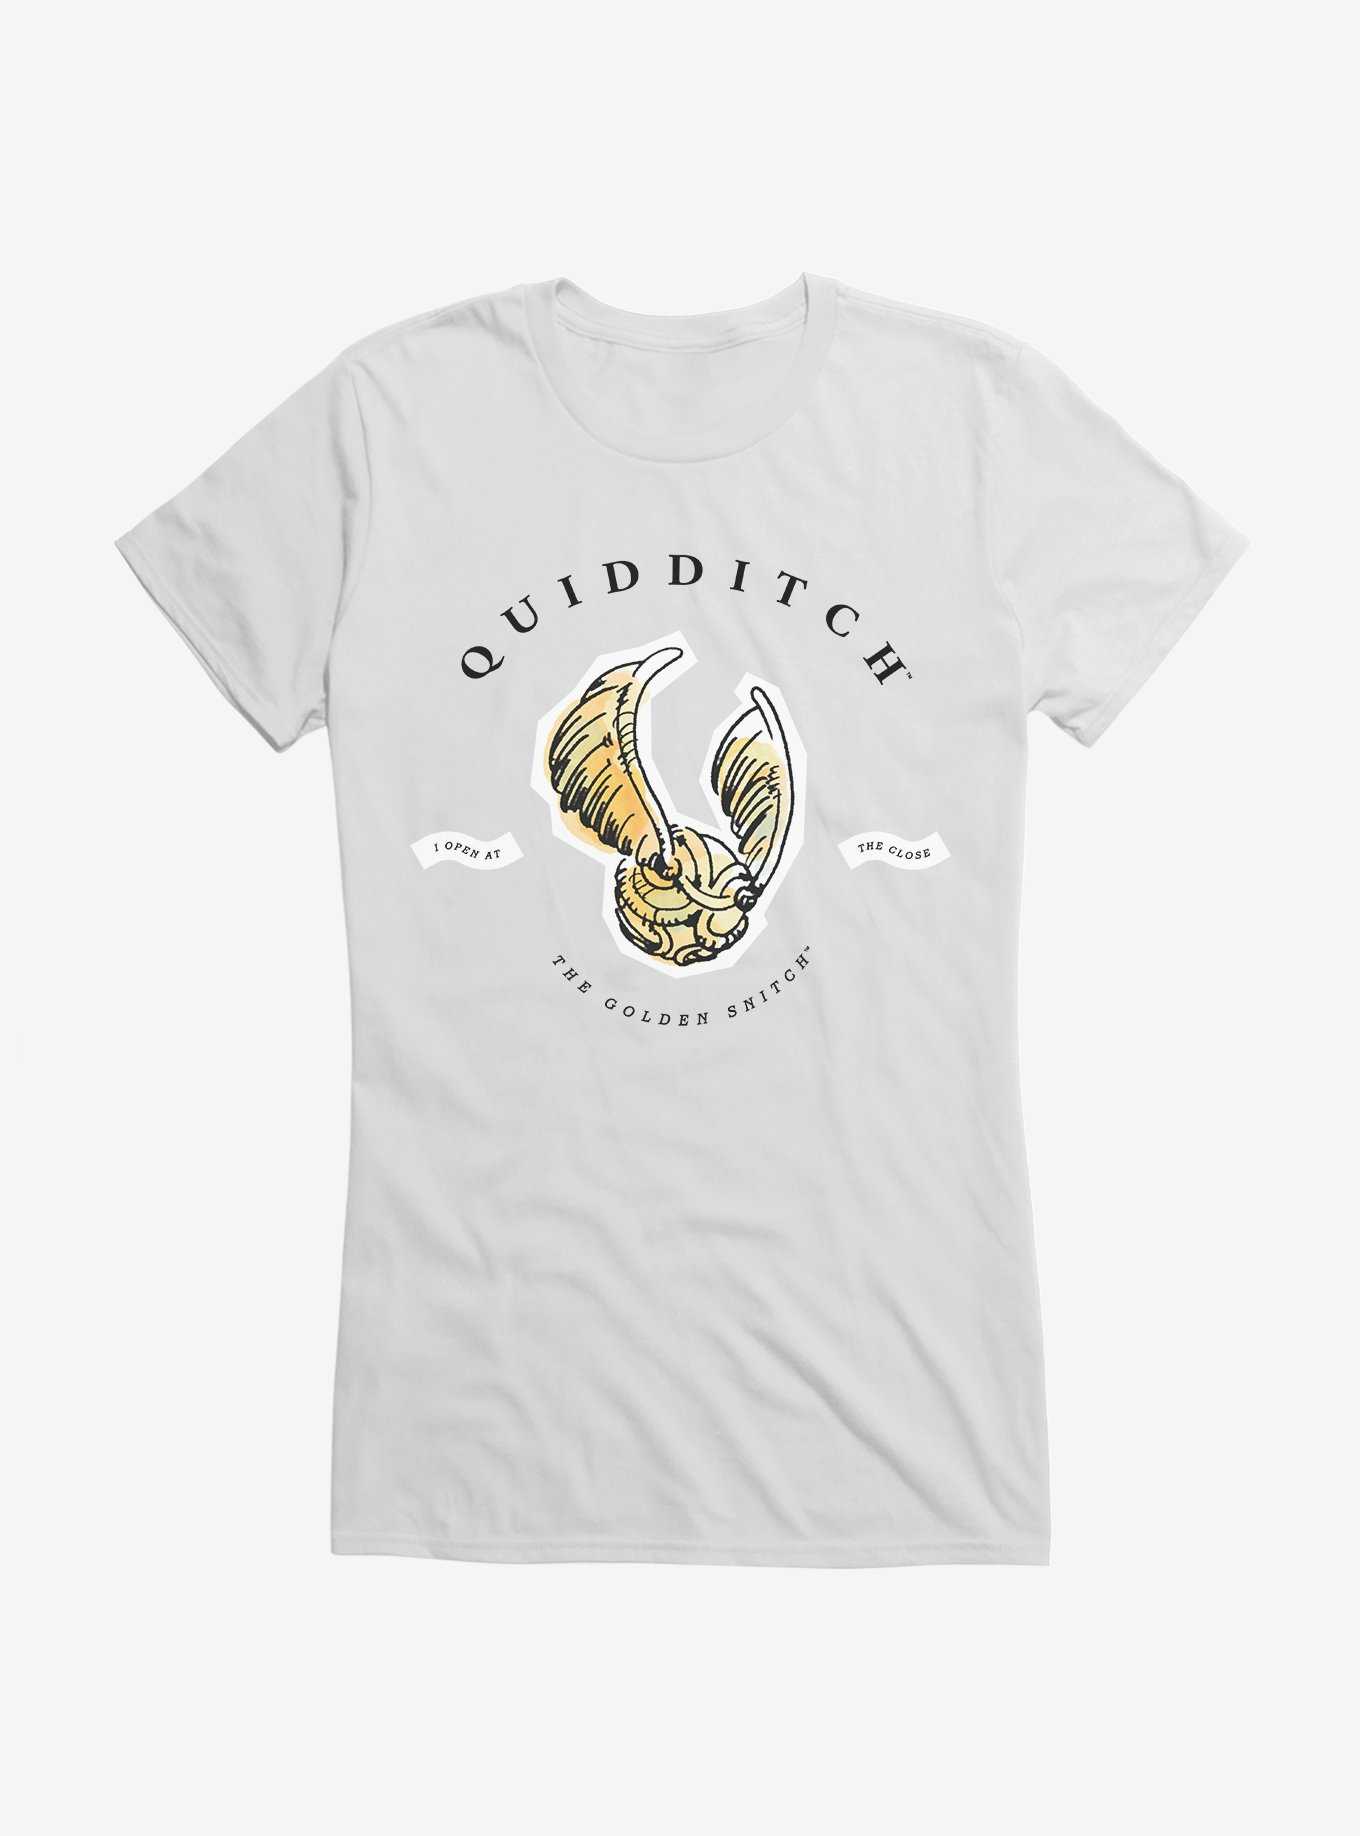 Potter OFFICIAL Merch Hot | Golden Shirts Topic & Snitch Harry